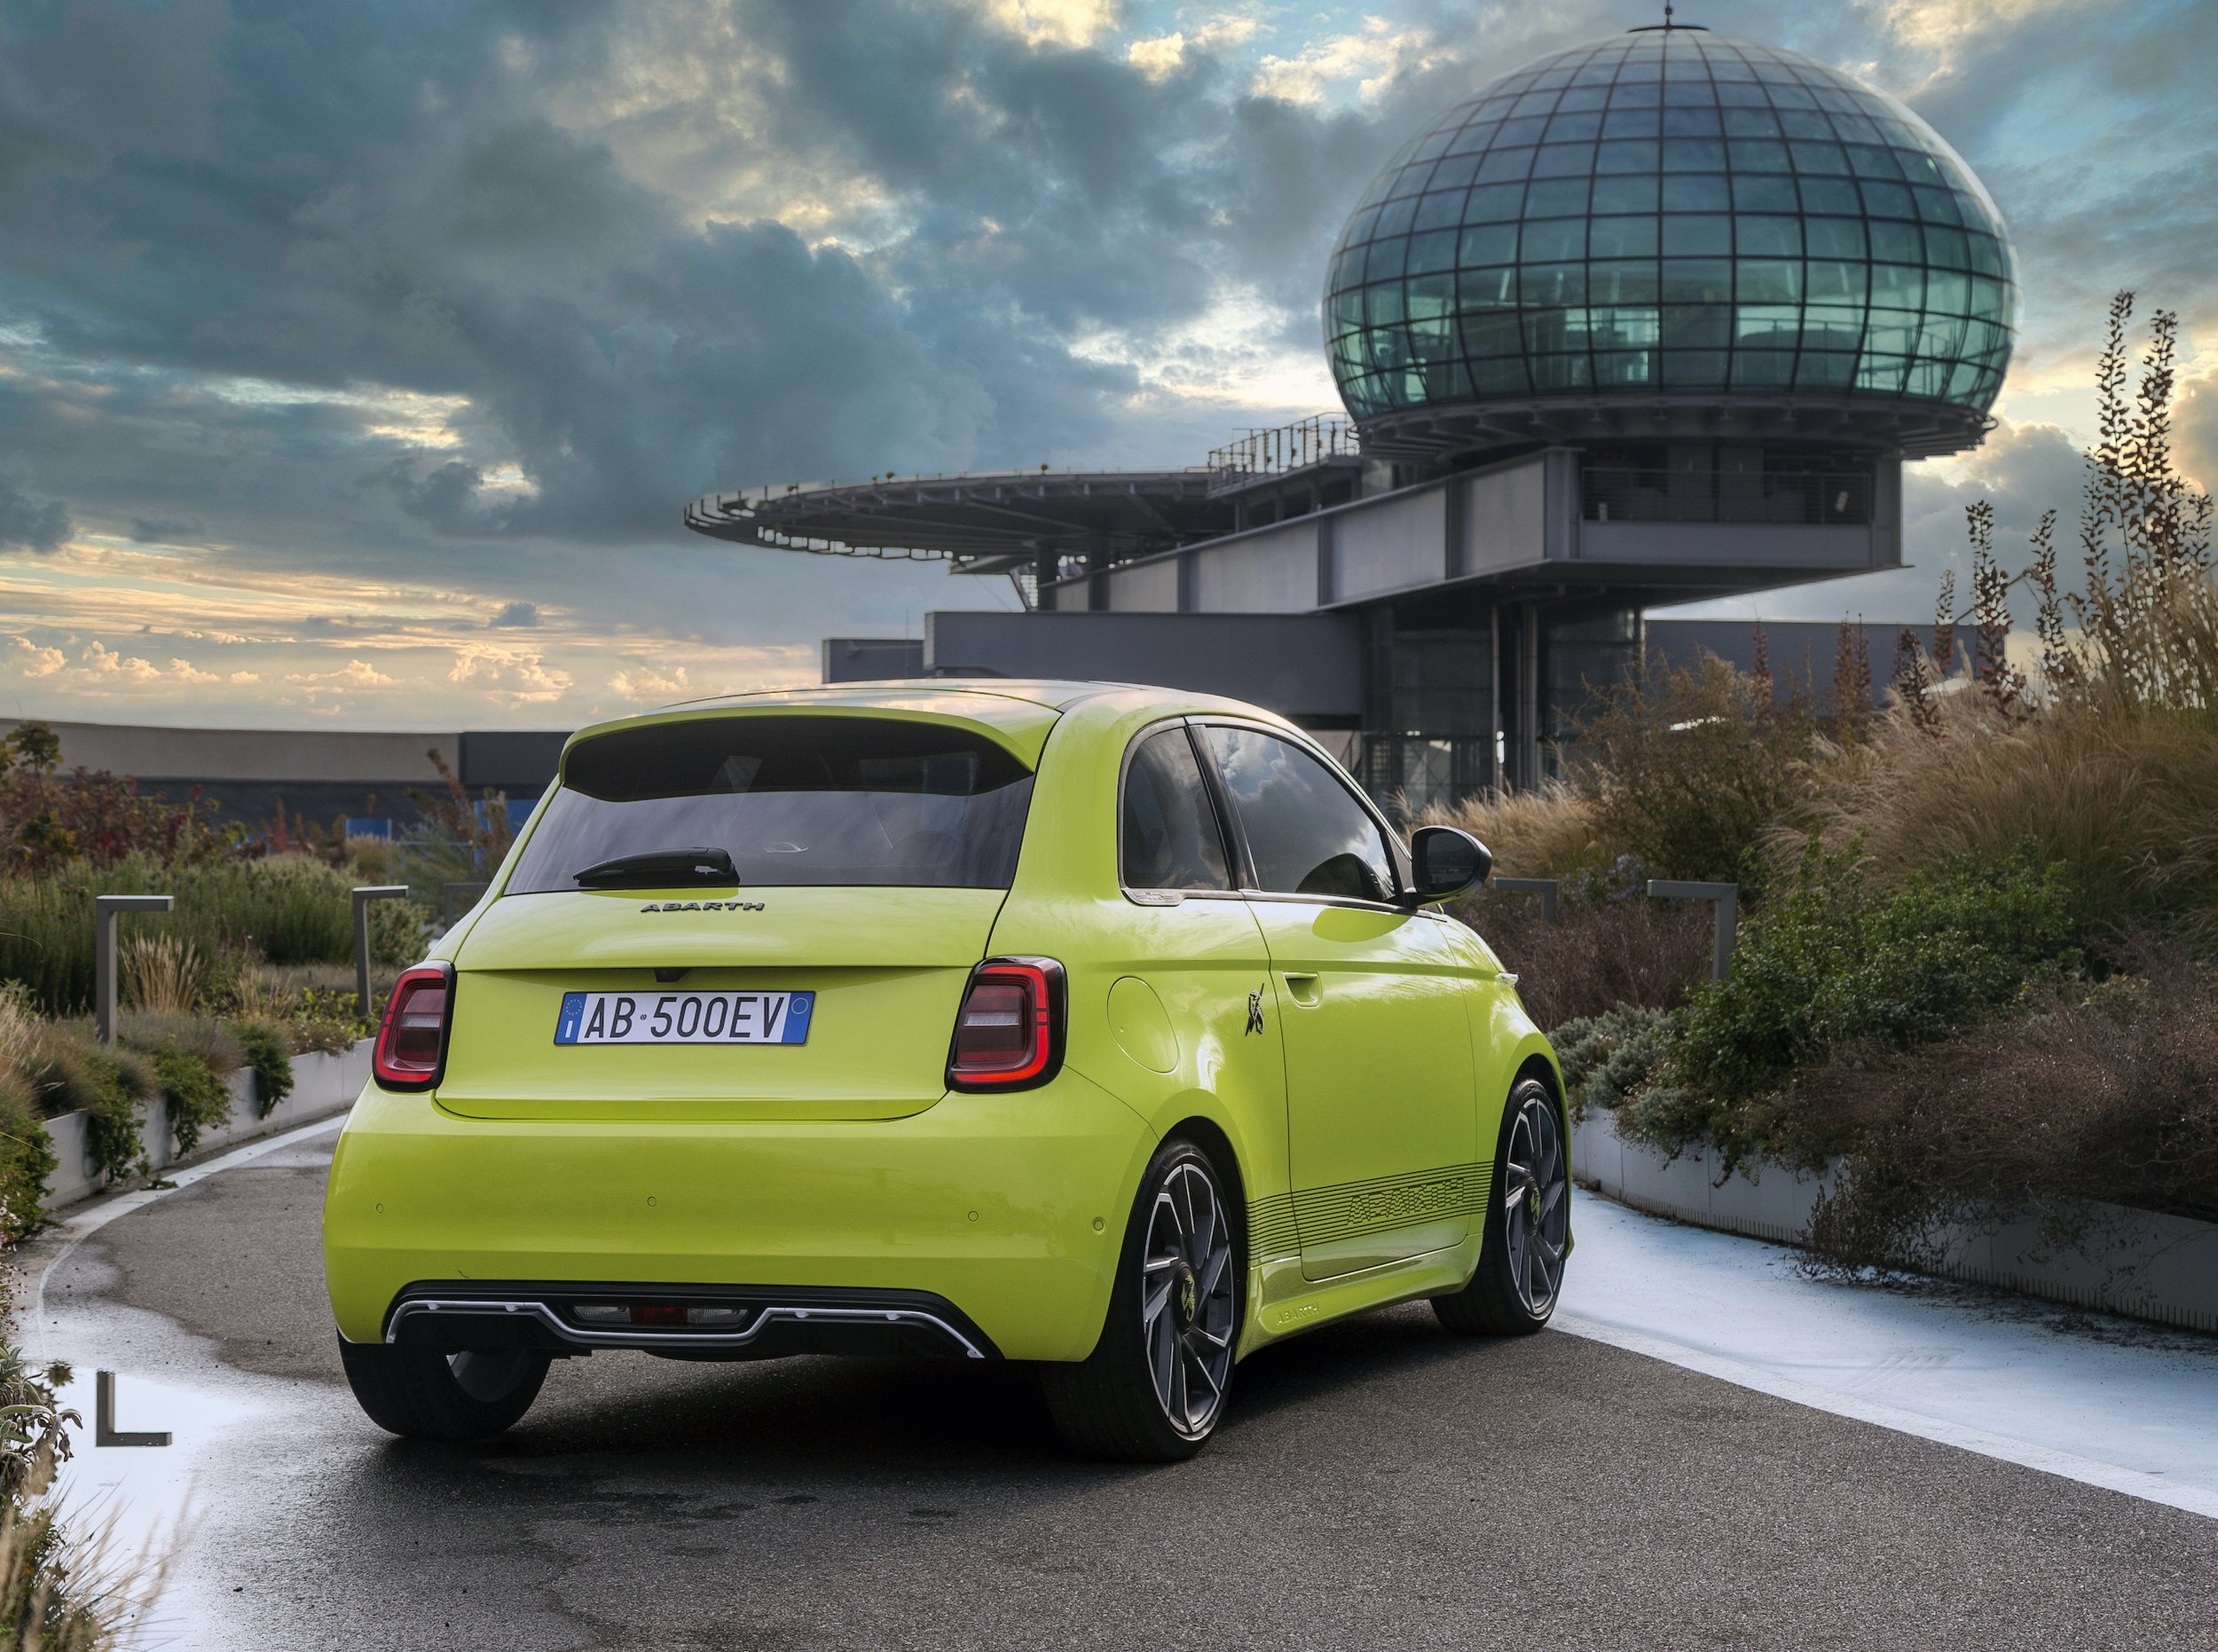 The new Abarth 595 range: the Scorpion stings once again, Abarth